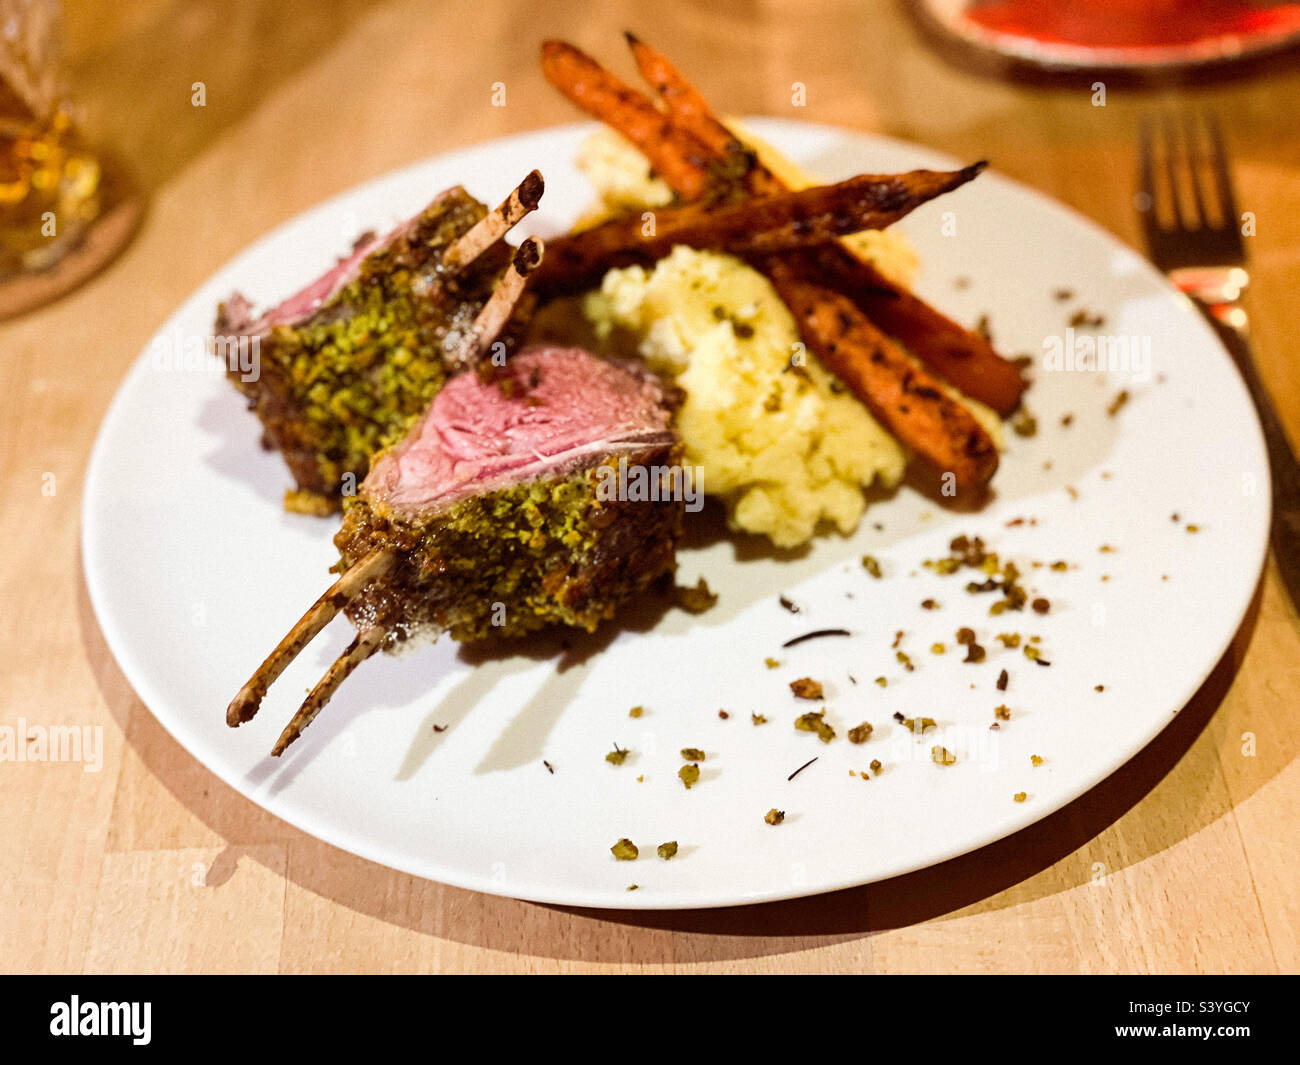 Beautiful dish of lamb with mashed potatoes and carrots on the plate home cooking Stock Photo